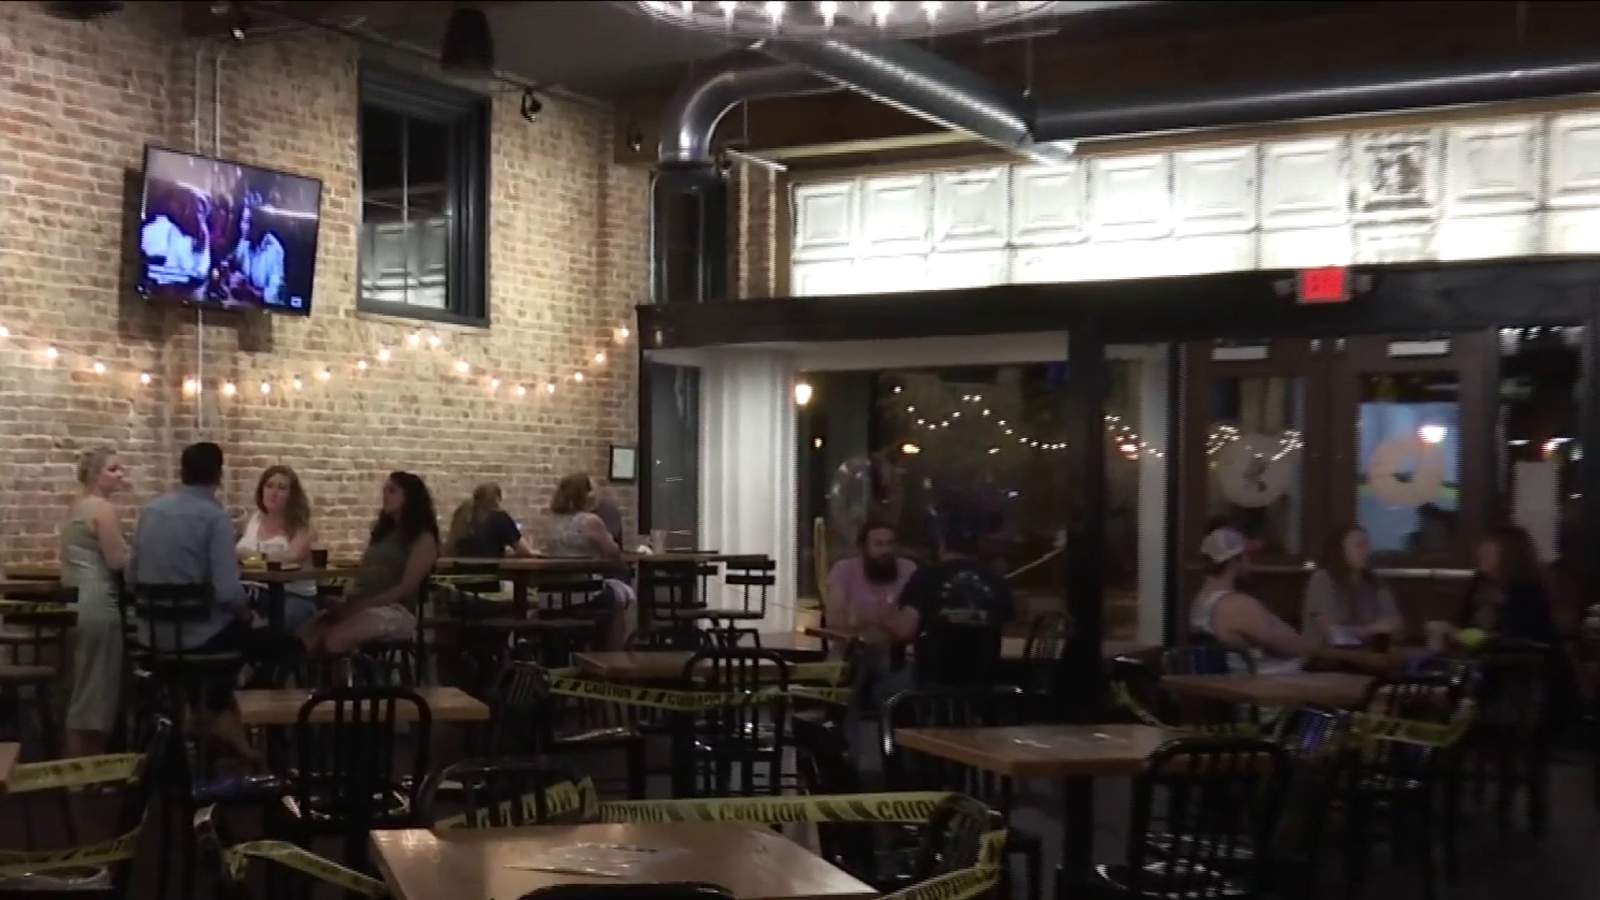 Restaurants, breweries reopen their dining rooms under Phase Two guidelines